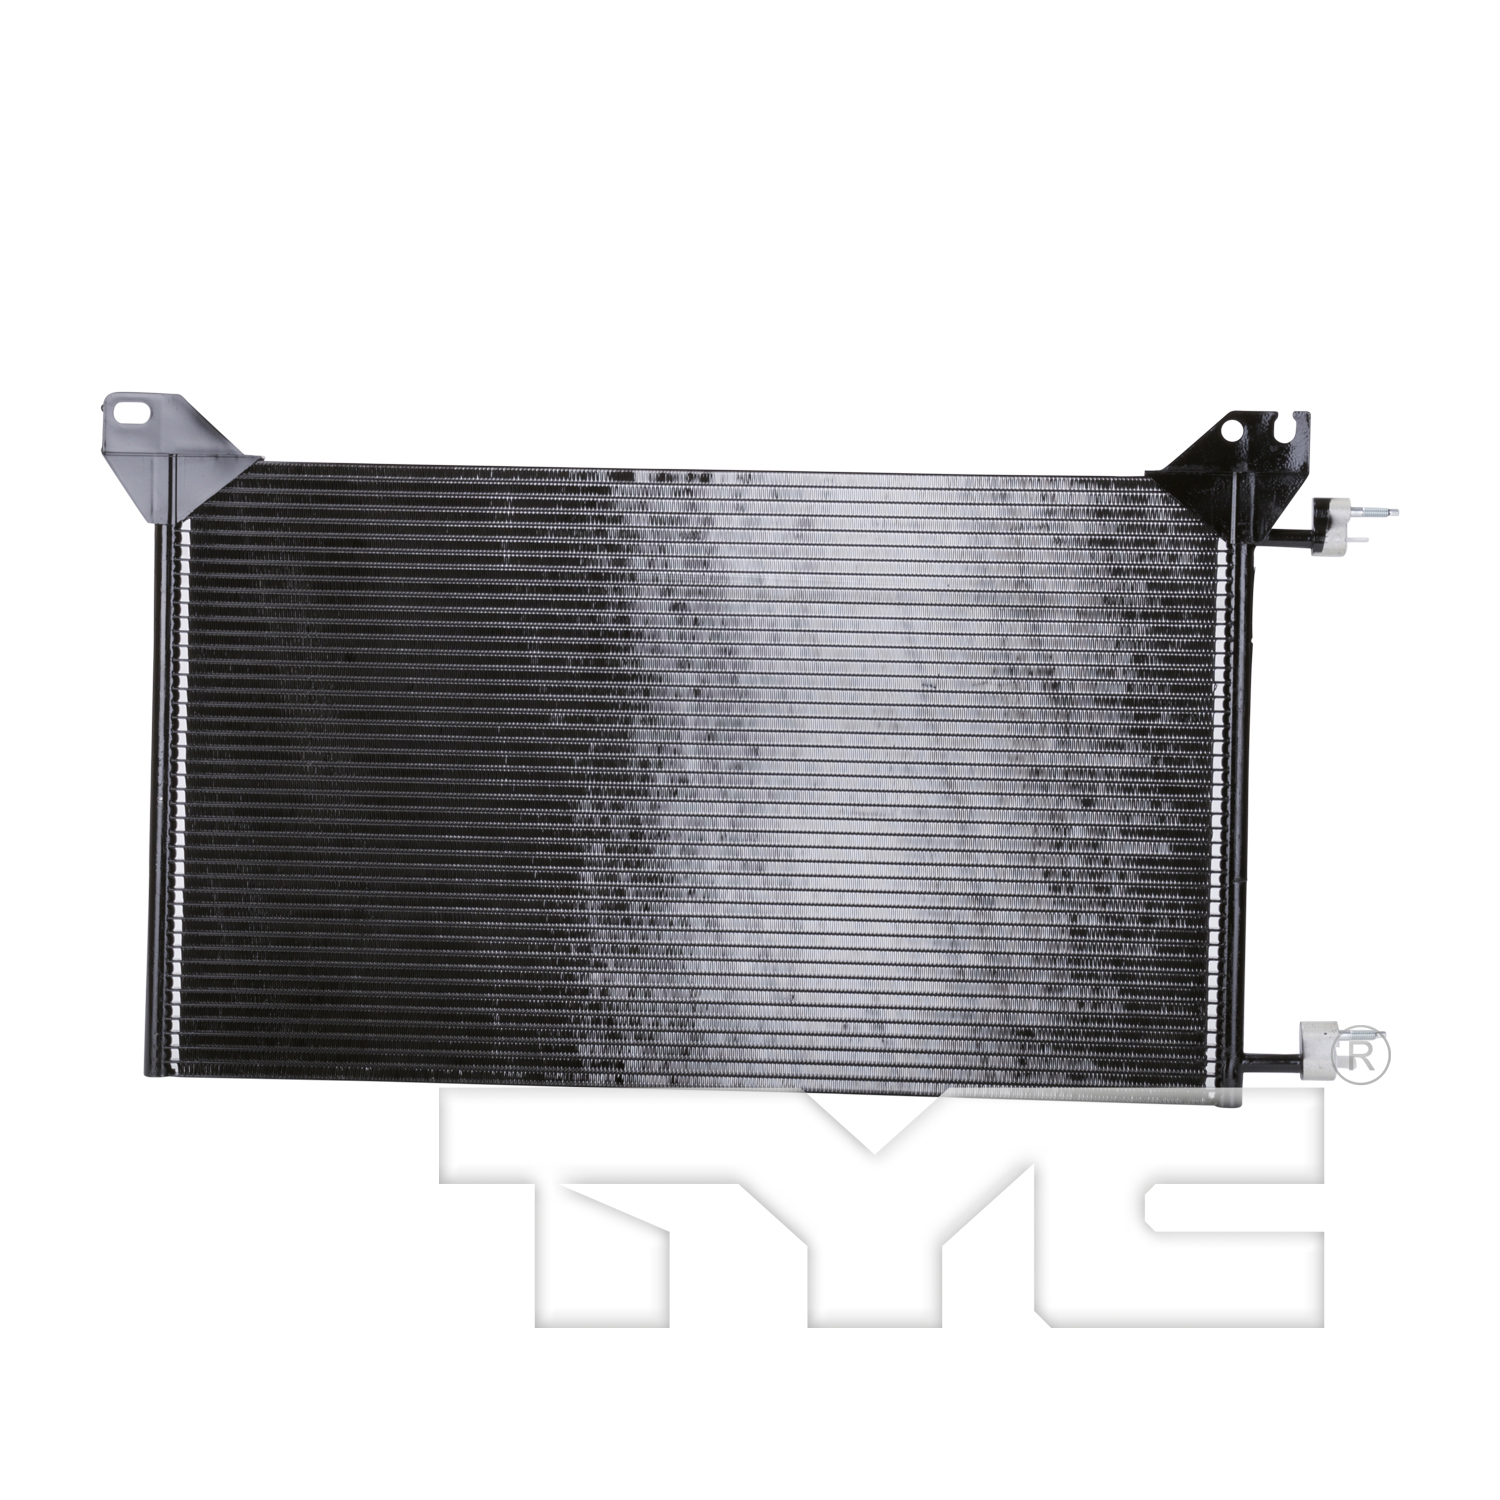 Aftermarket AC CONDENSERS for GMC - SIERRA 2500 HD CLASSIC, SIERRA 2500 HD CLASSIC,07-07,Air conditioning condenser